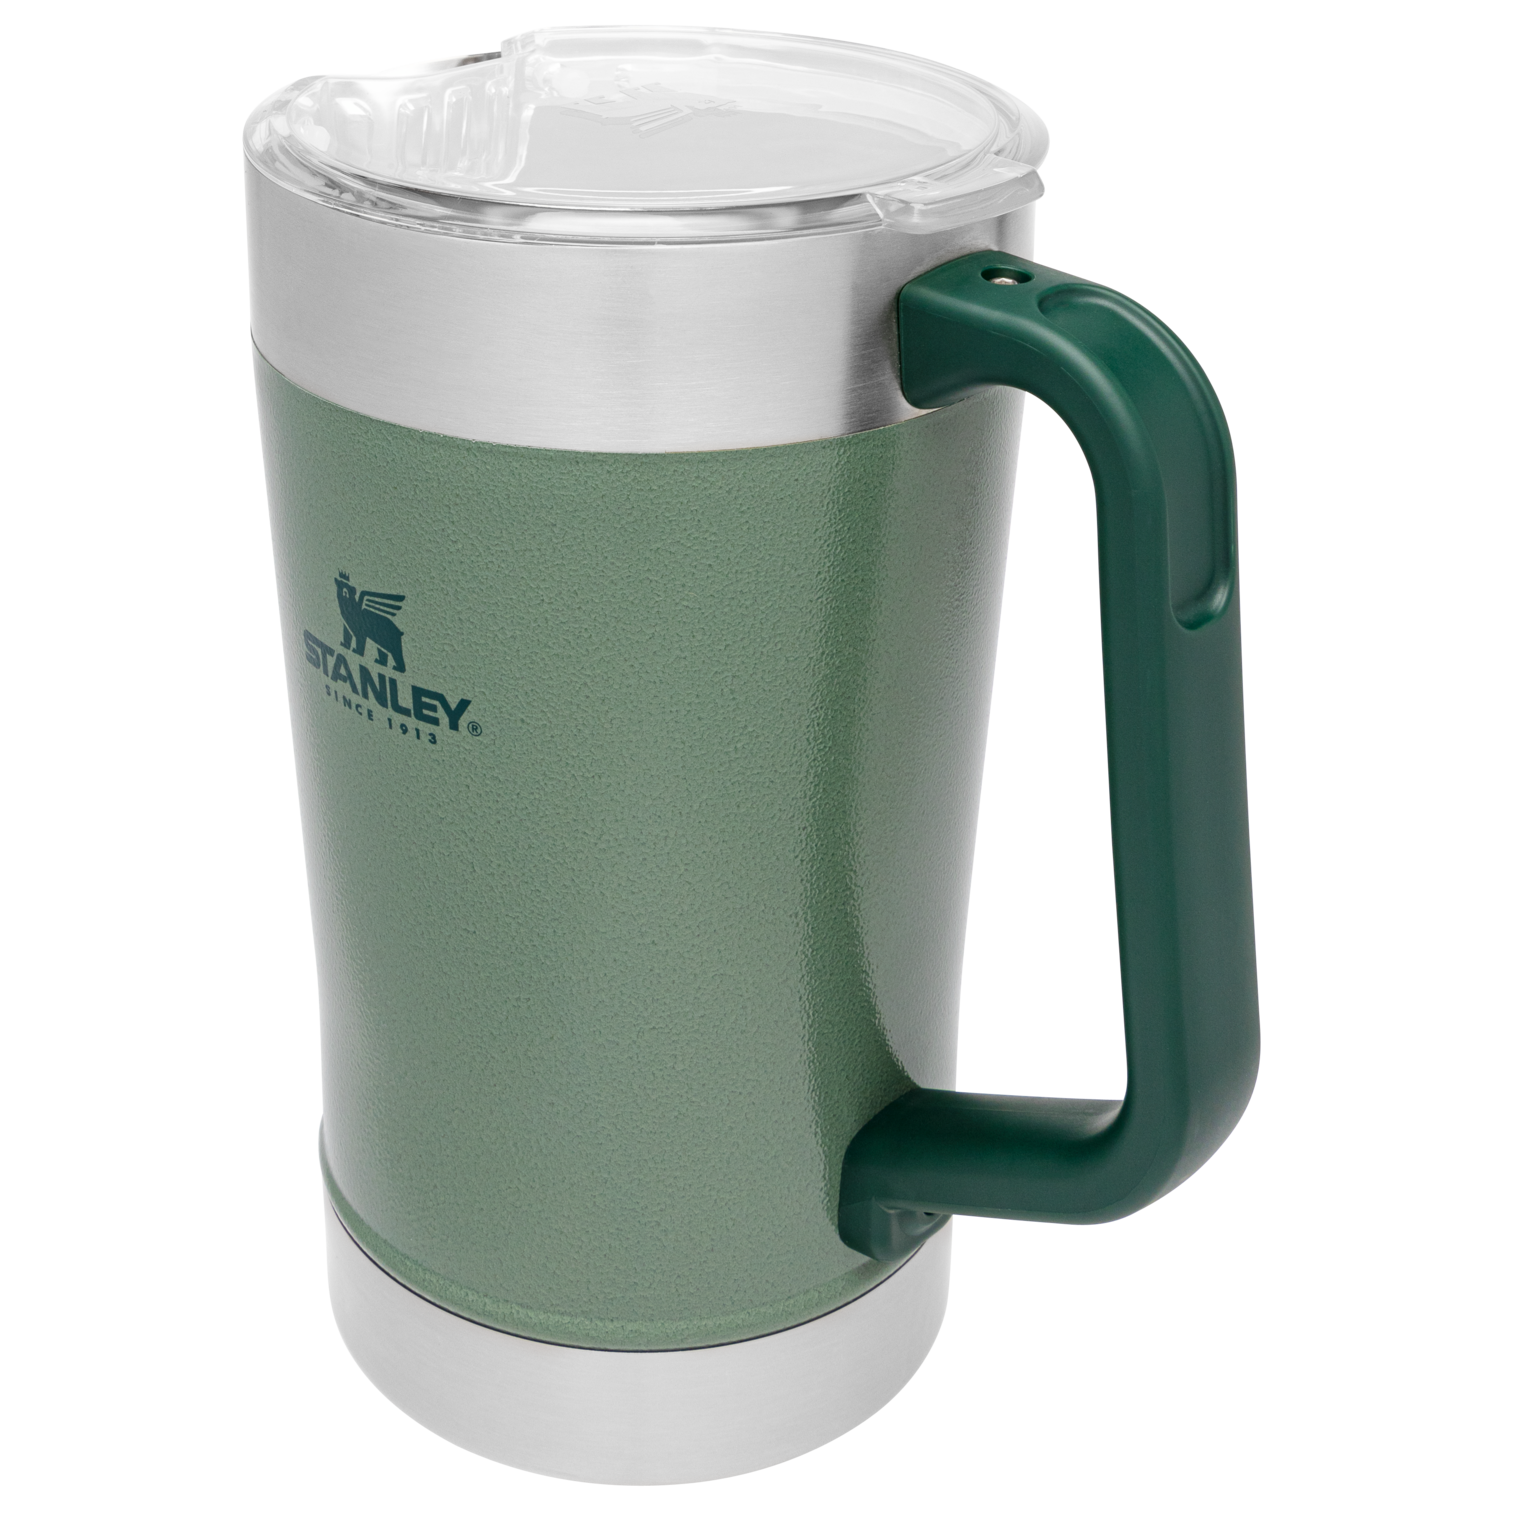 Classic Stay Chill Beer Pitcher | 64 OZ: Hammertone Green